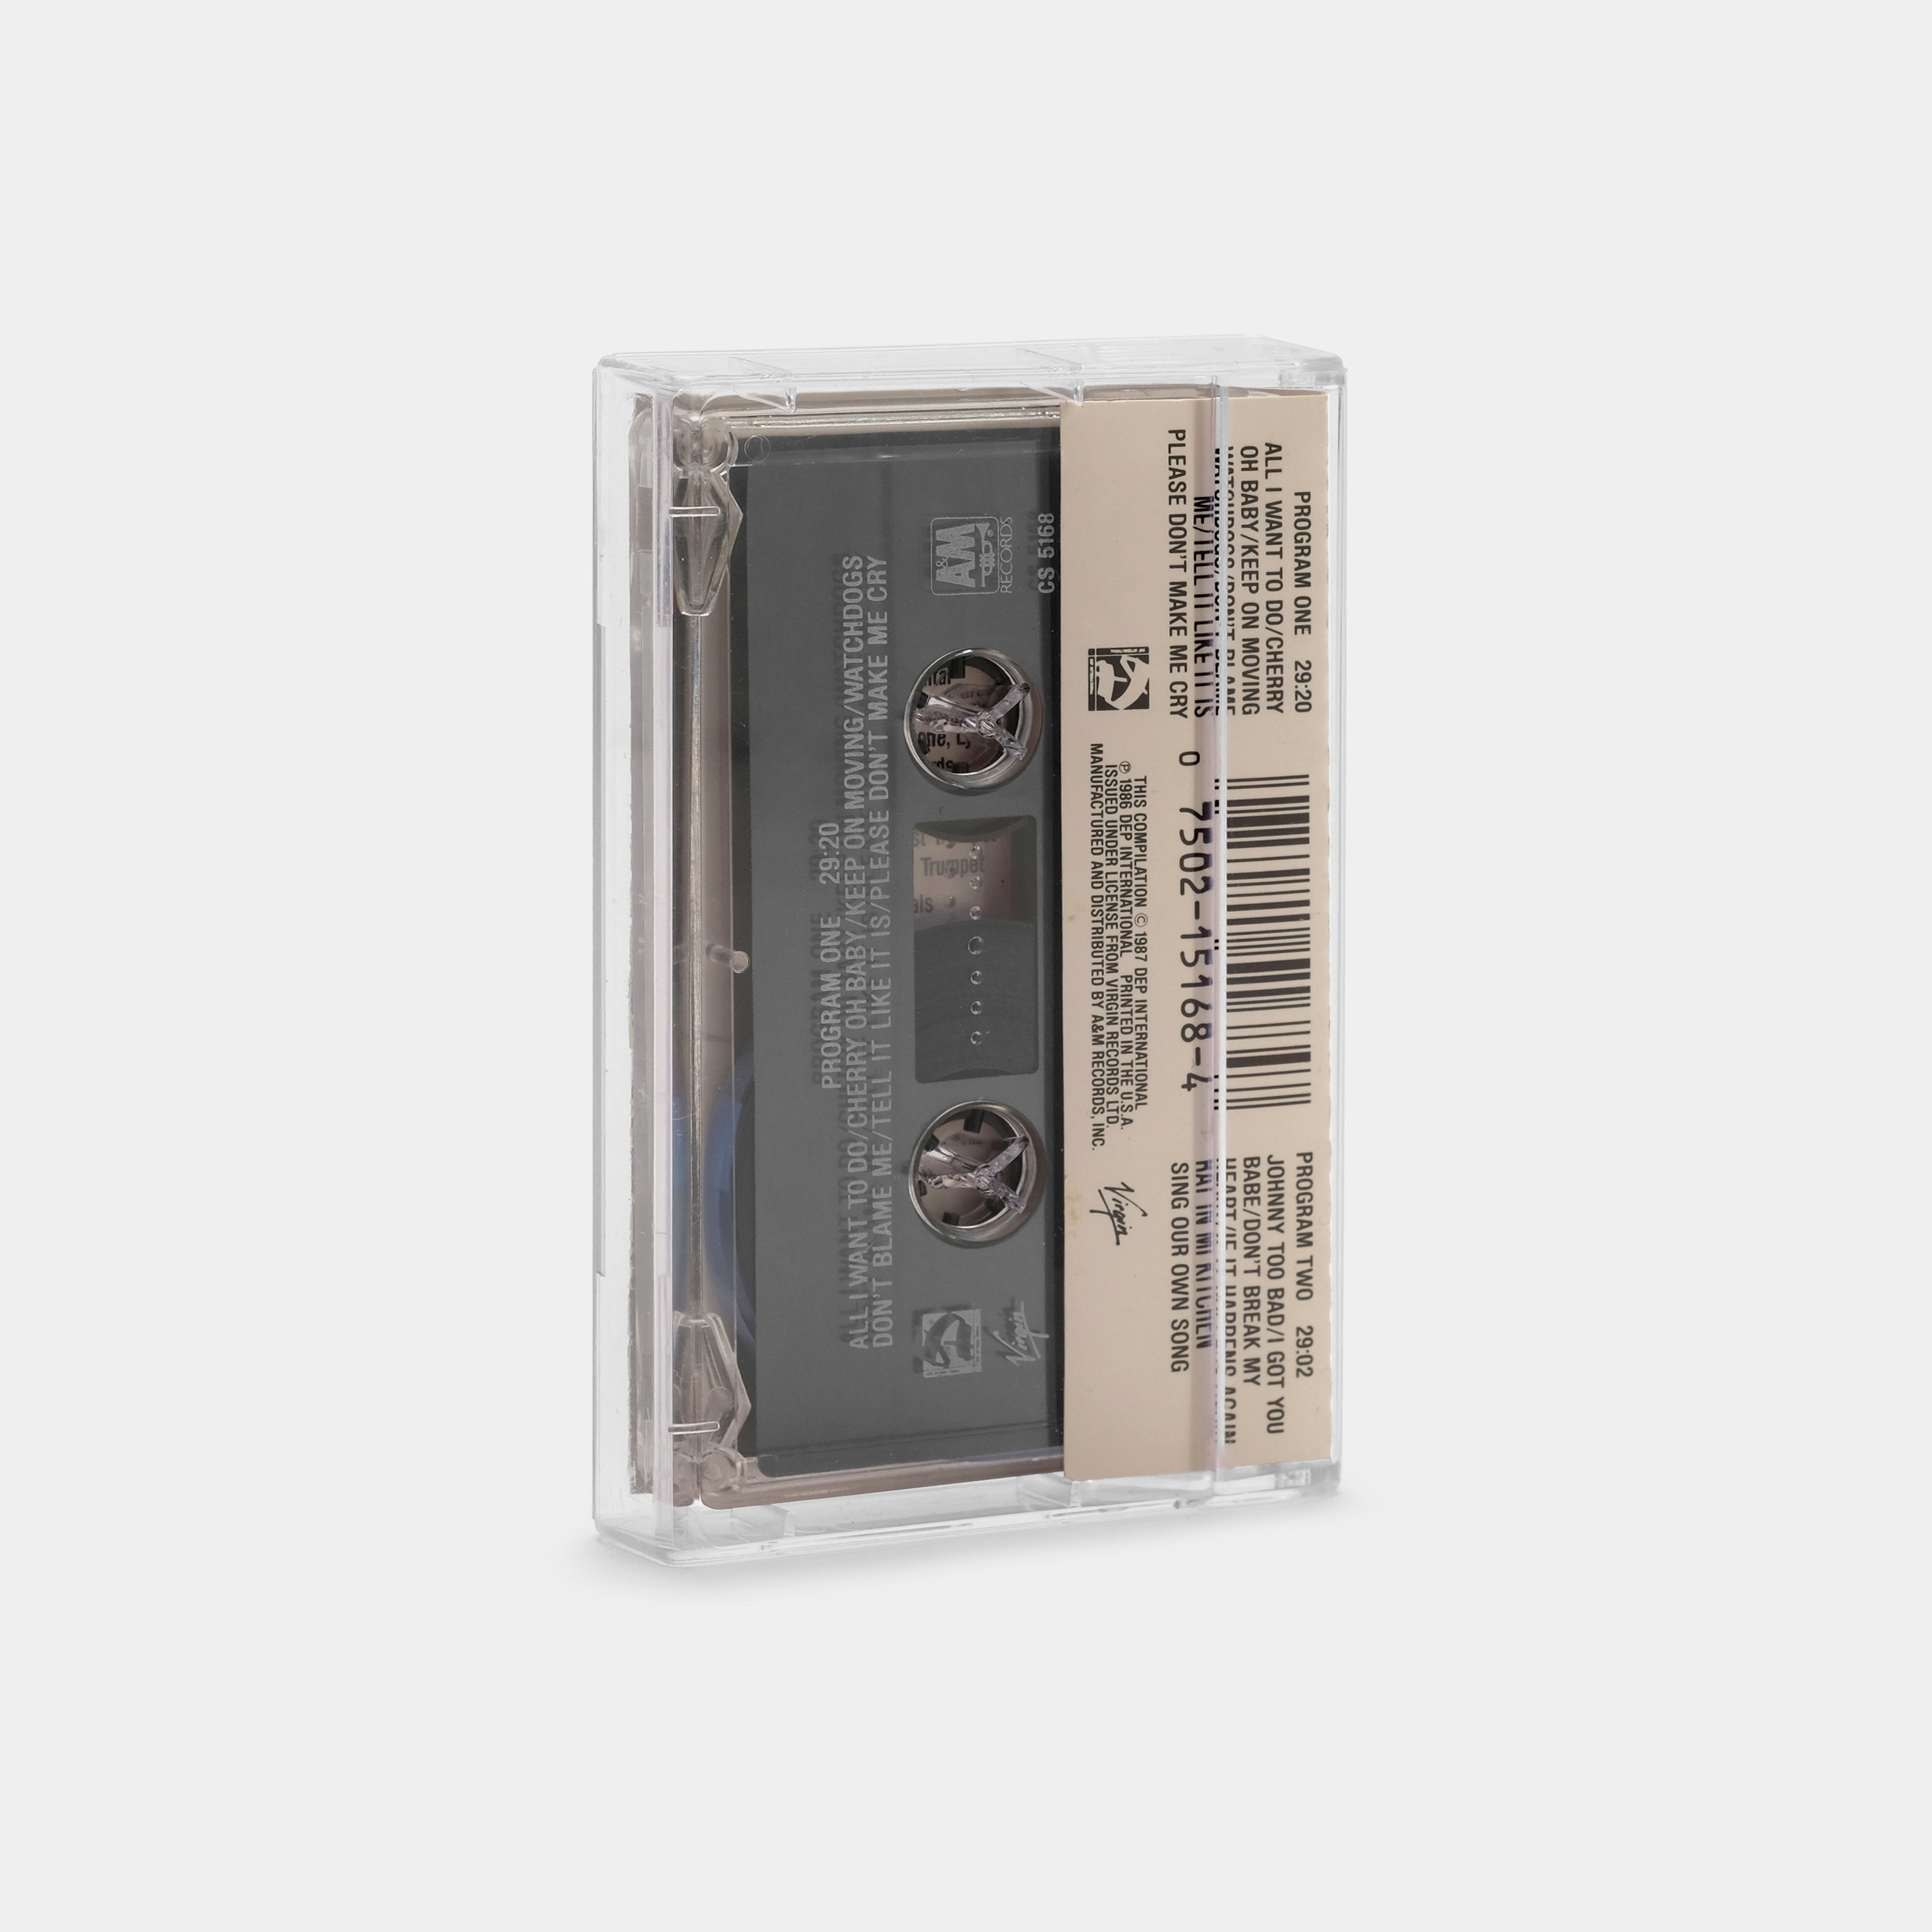 UB40 - UB40 CCCP: Live in Moscow Cassette Tape